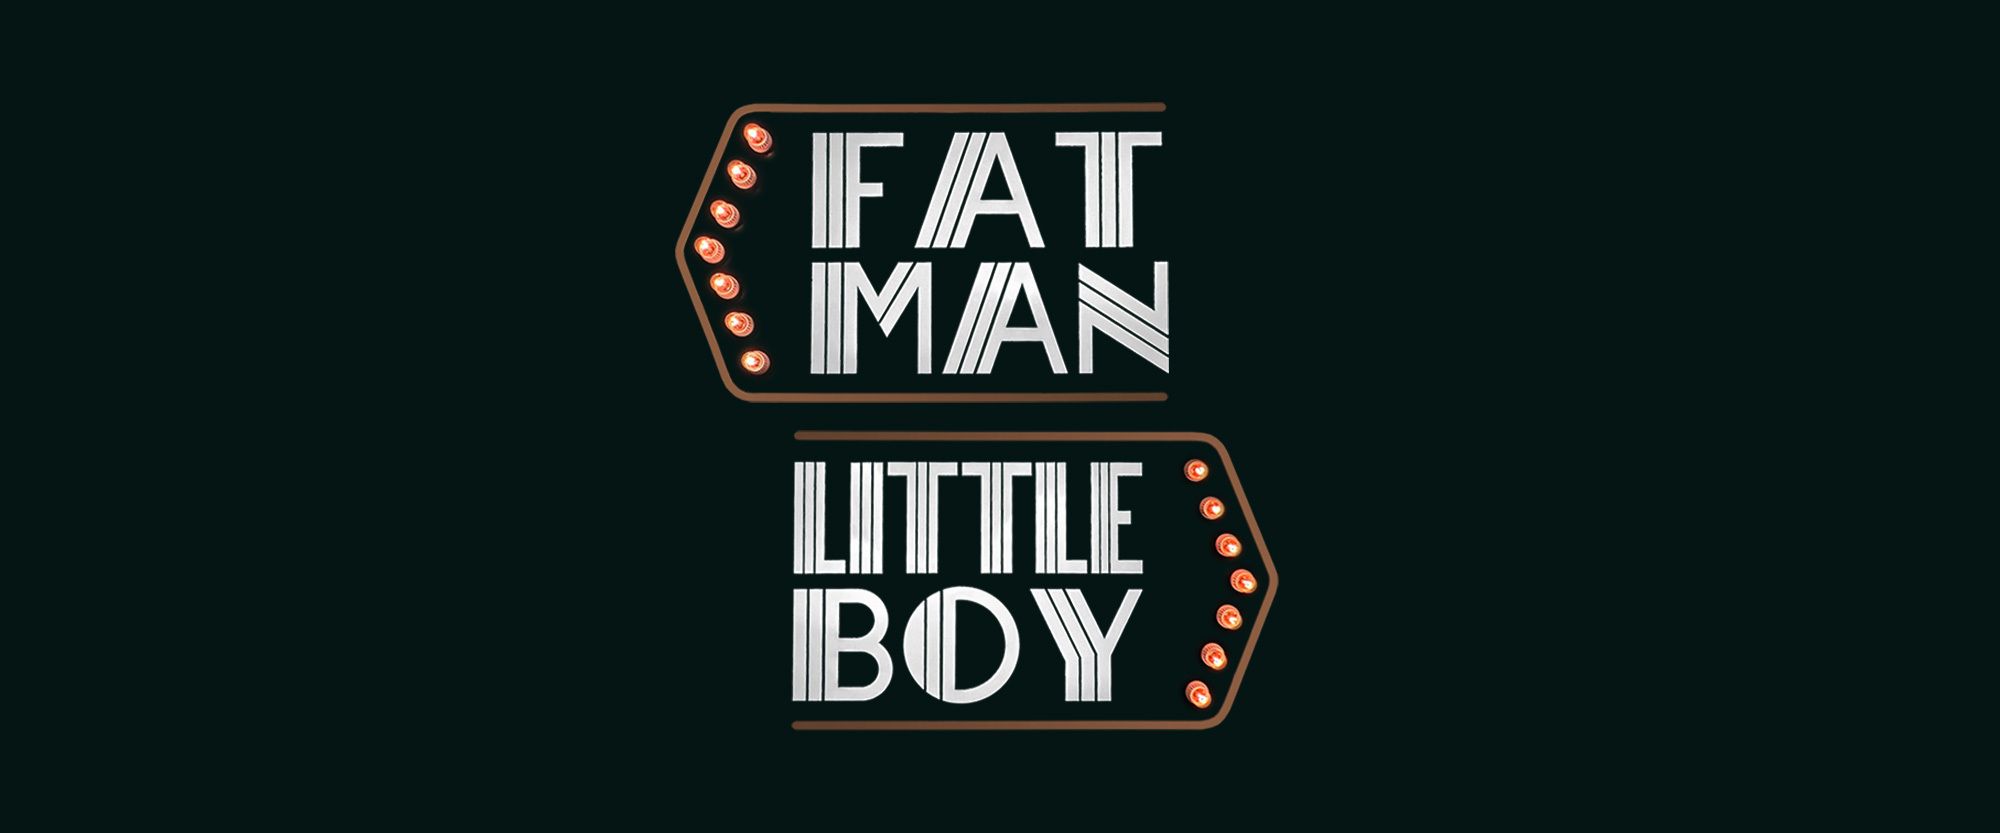 Fat Man and Little Boy room signs